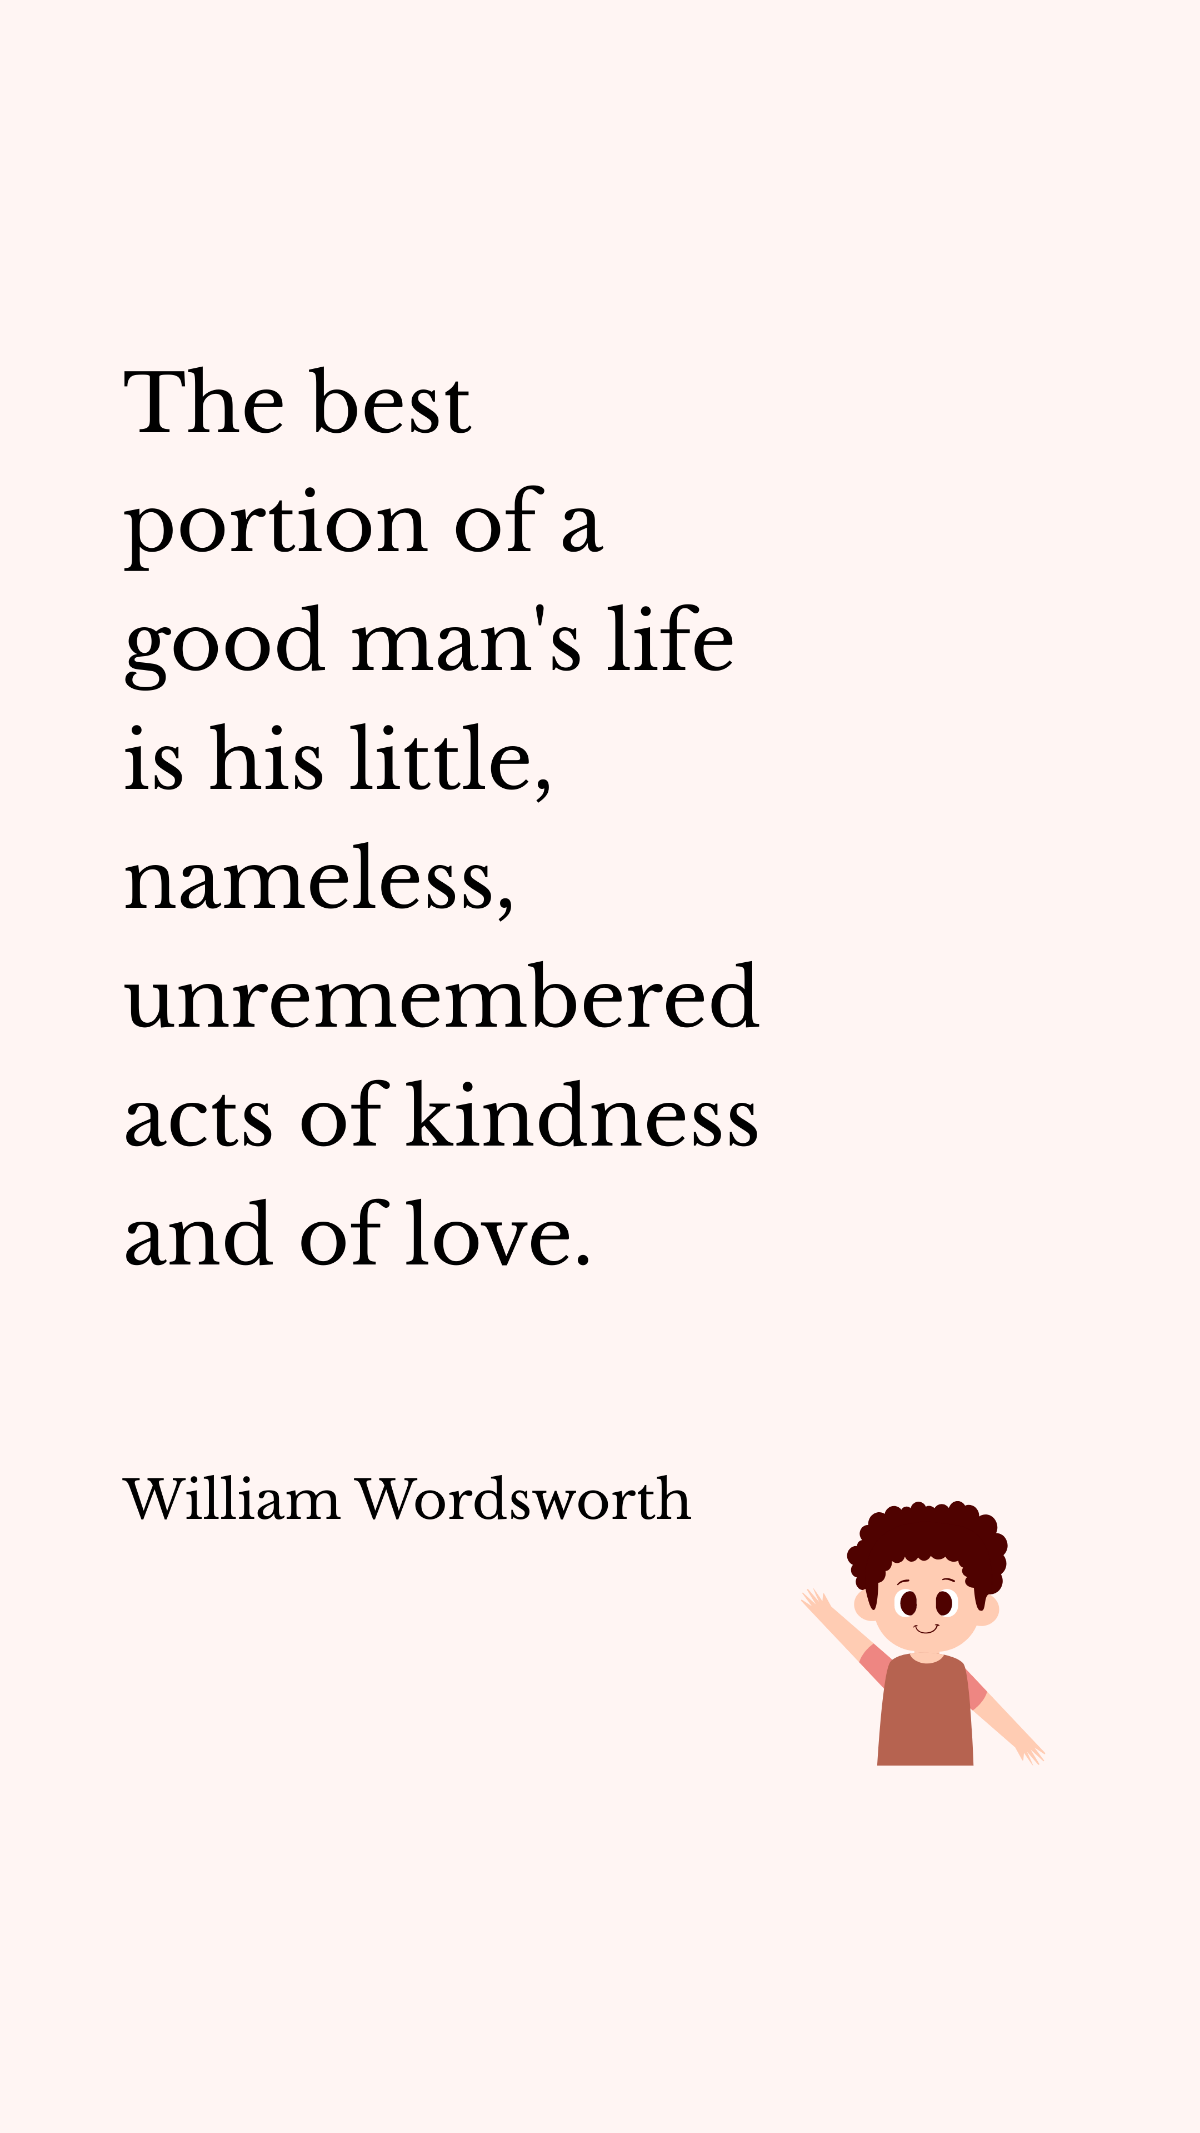 Free William Wordsworth - The best portion of a good man's life is his little, nameless, unremembered acts of kindness and of love.  Template